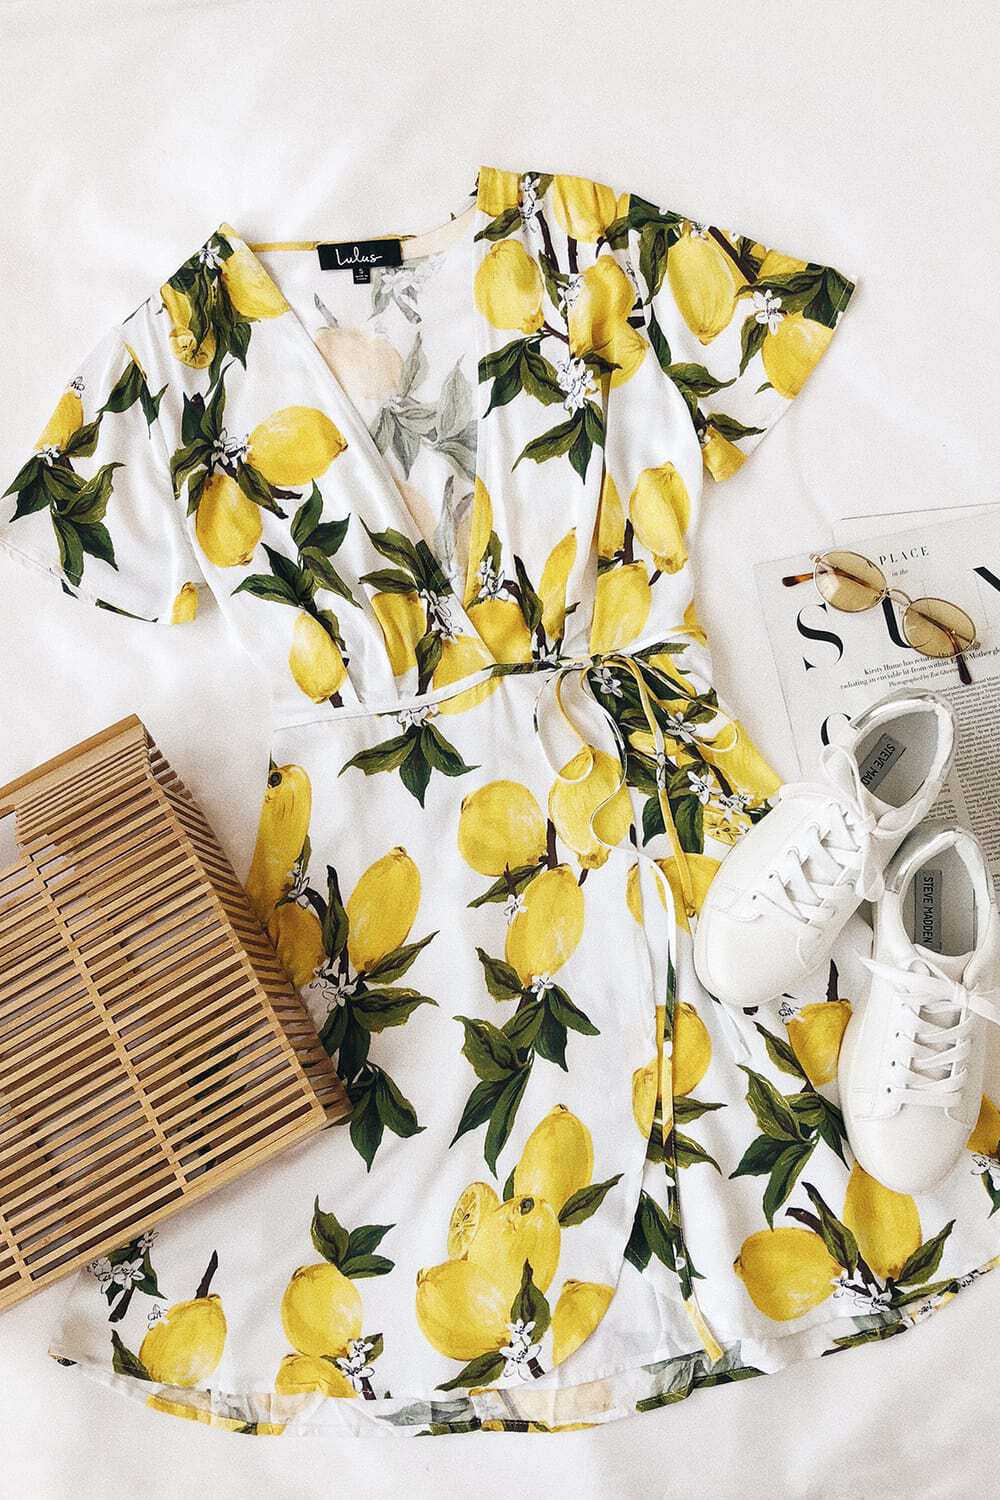 Flat lay featuring short-sleeved lemon print wrap dress, wooden bag, small oval sunglasses, and white sneakers, with part of an open magazine visible in the background